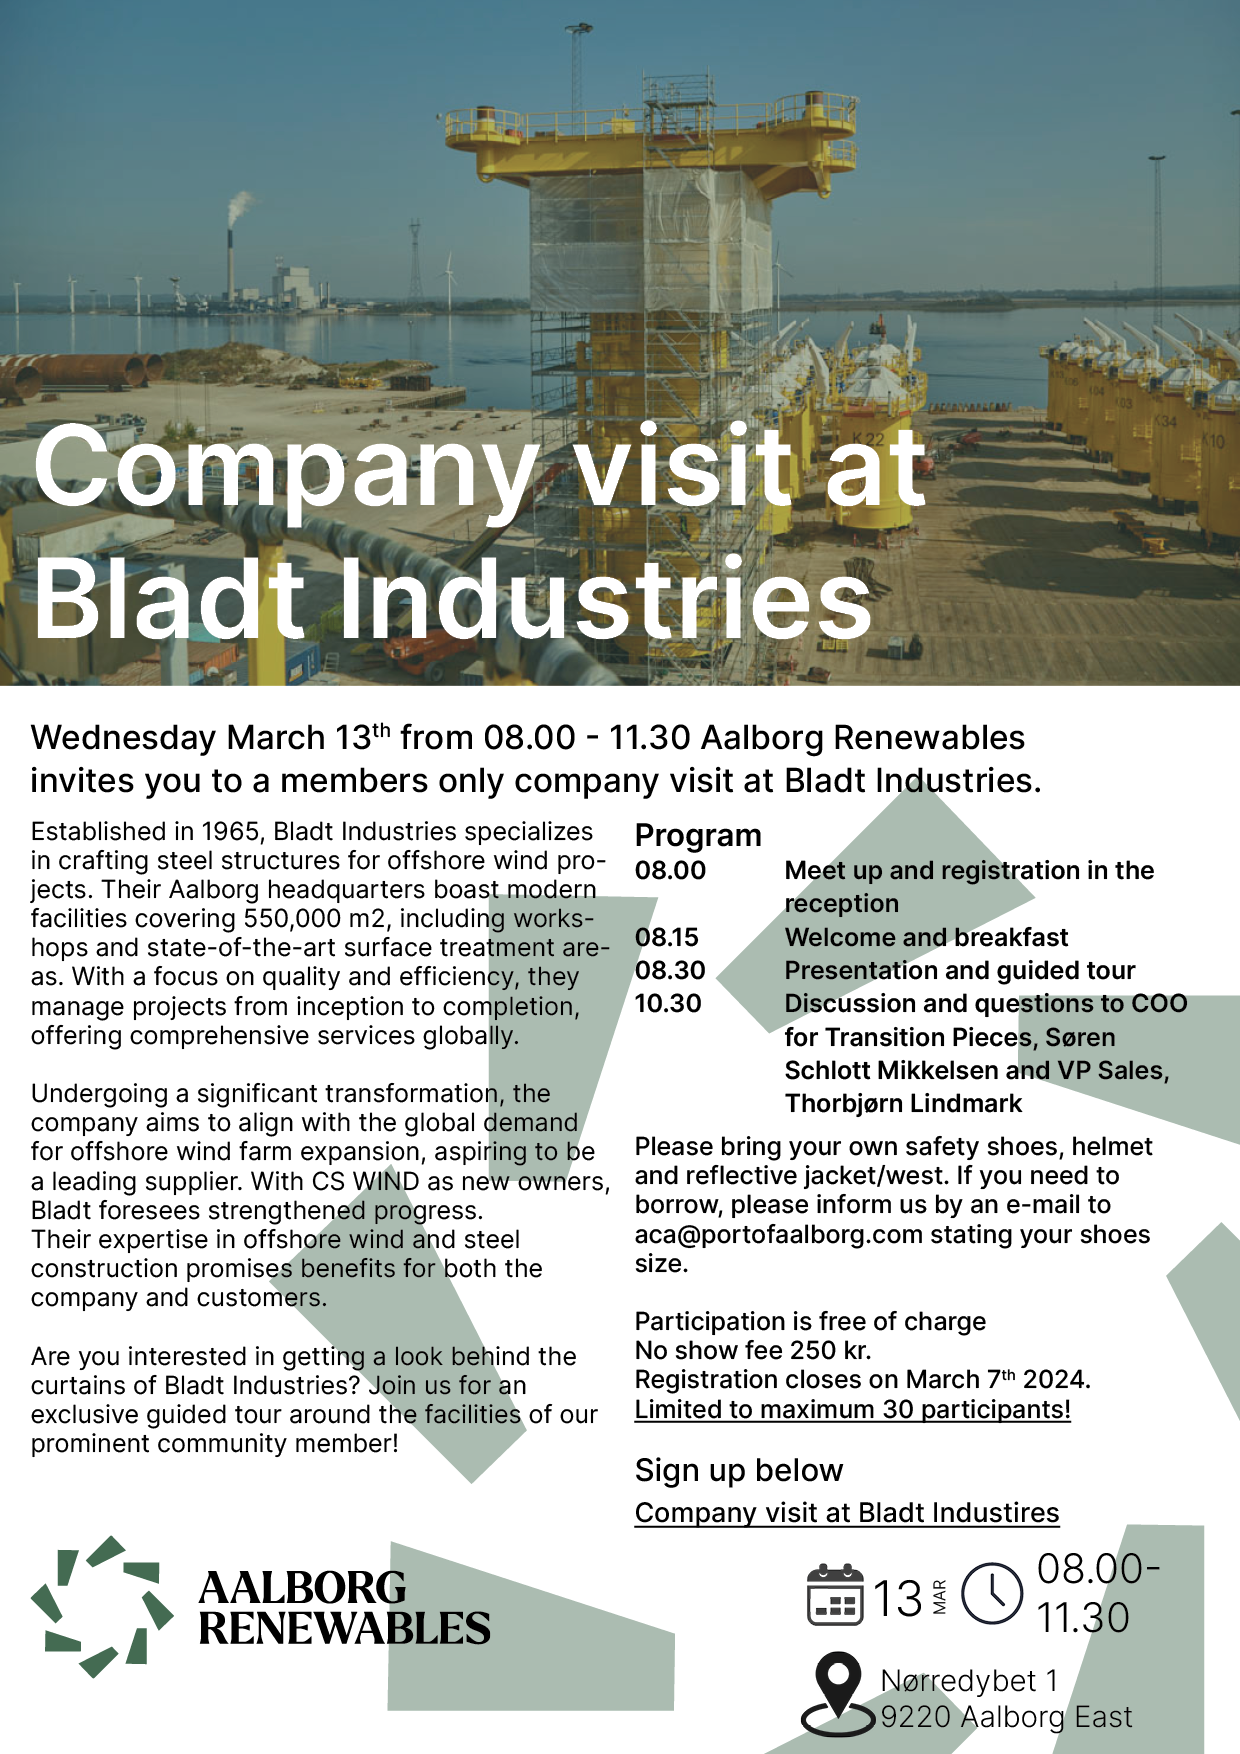 Company visit at Bladt Industries